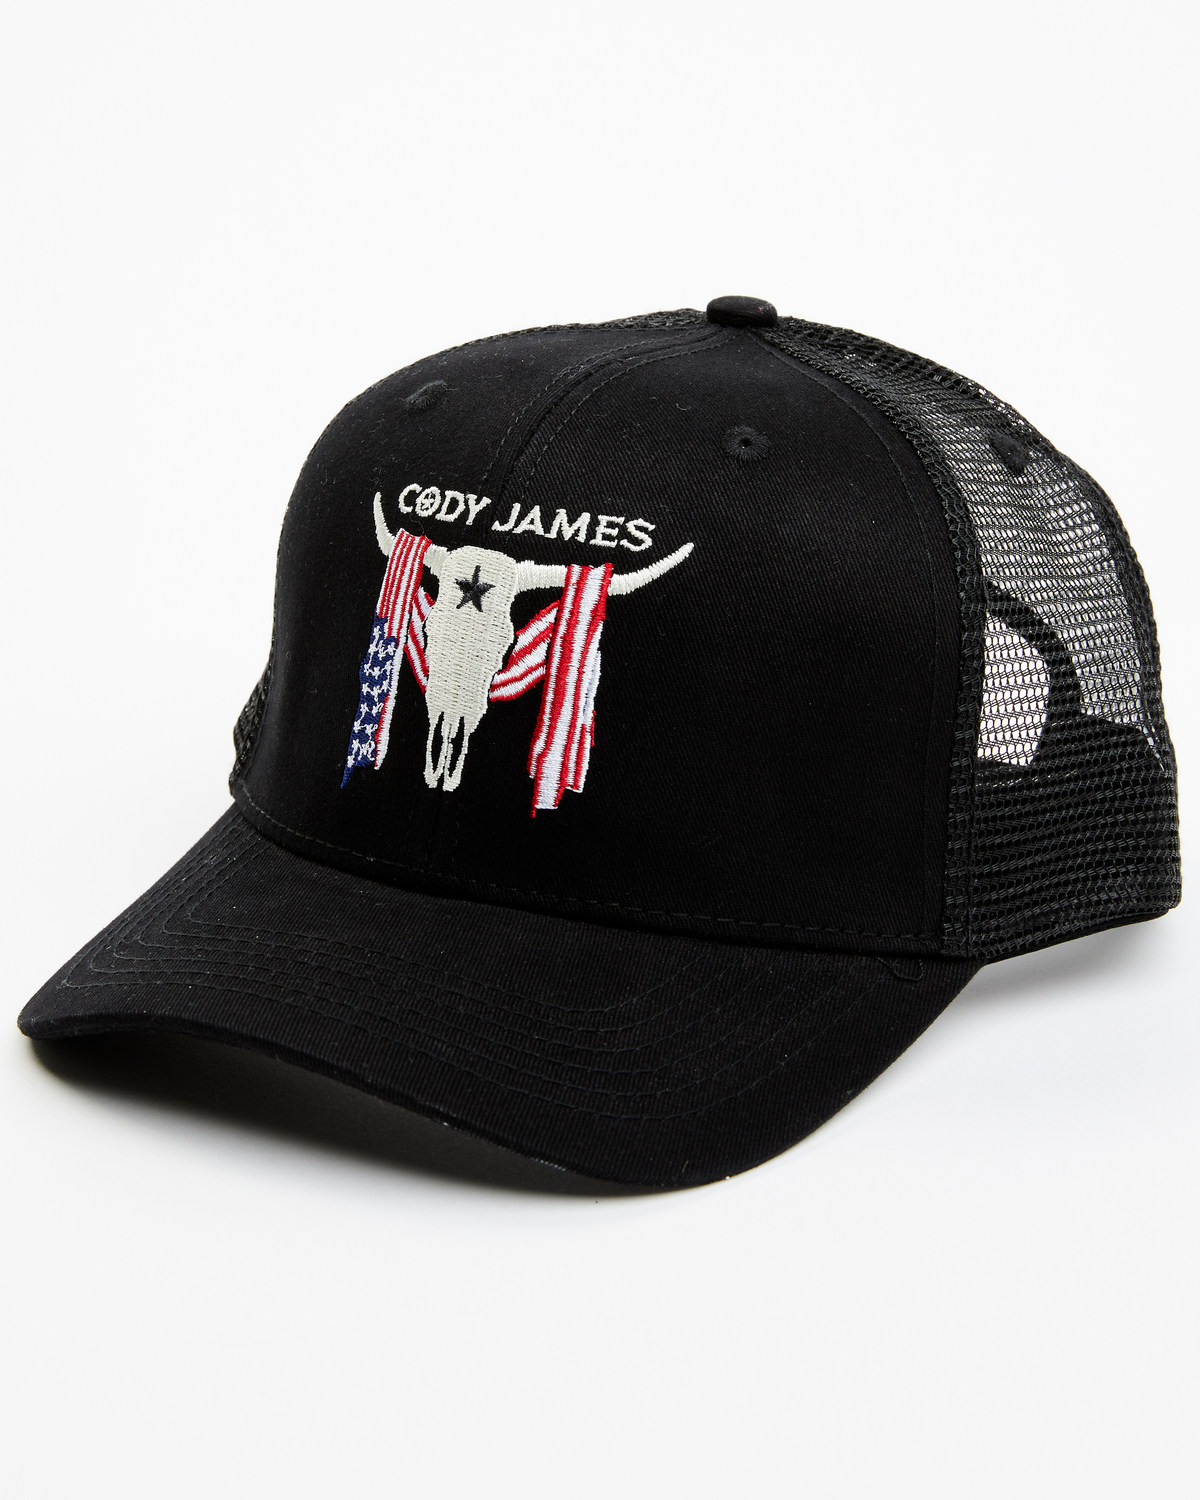 Cody James Men's Embroidered Steer Head American Flag Ball Cap